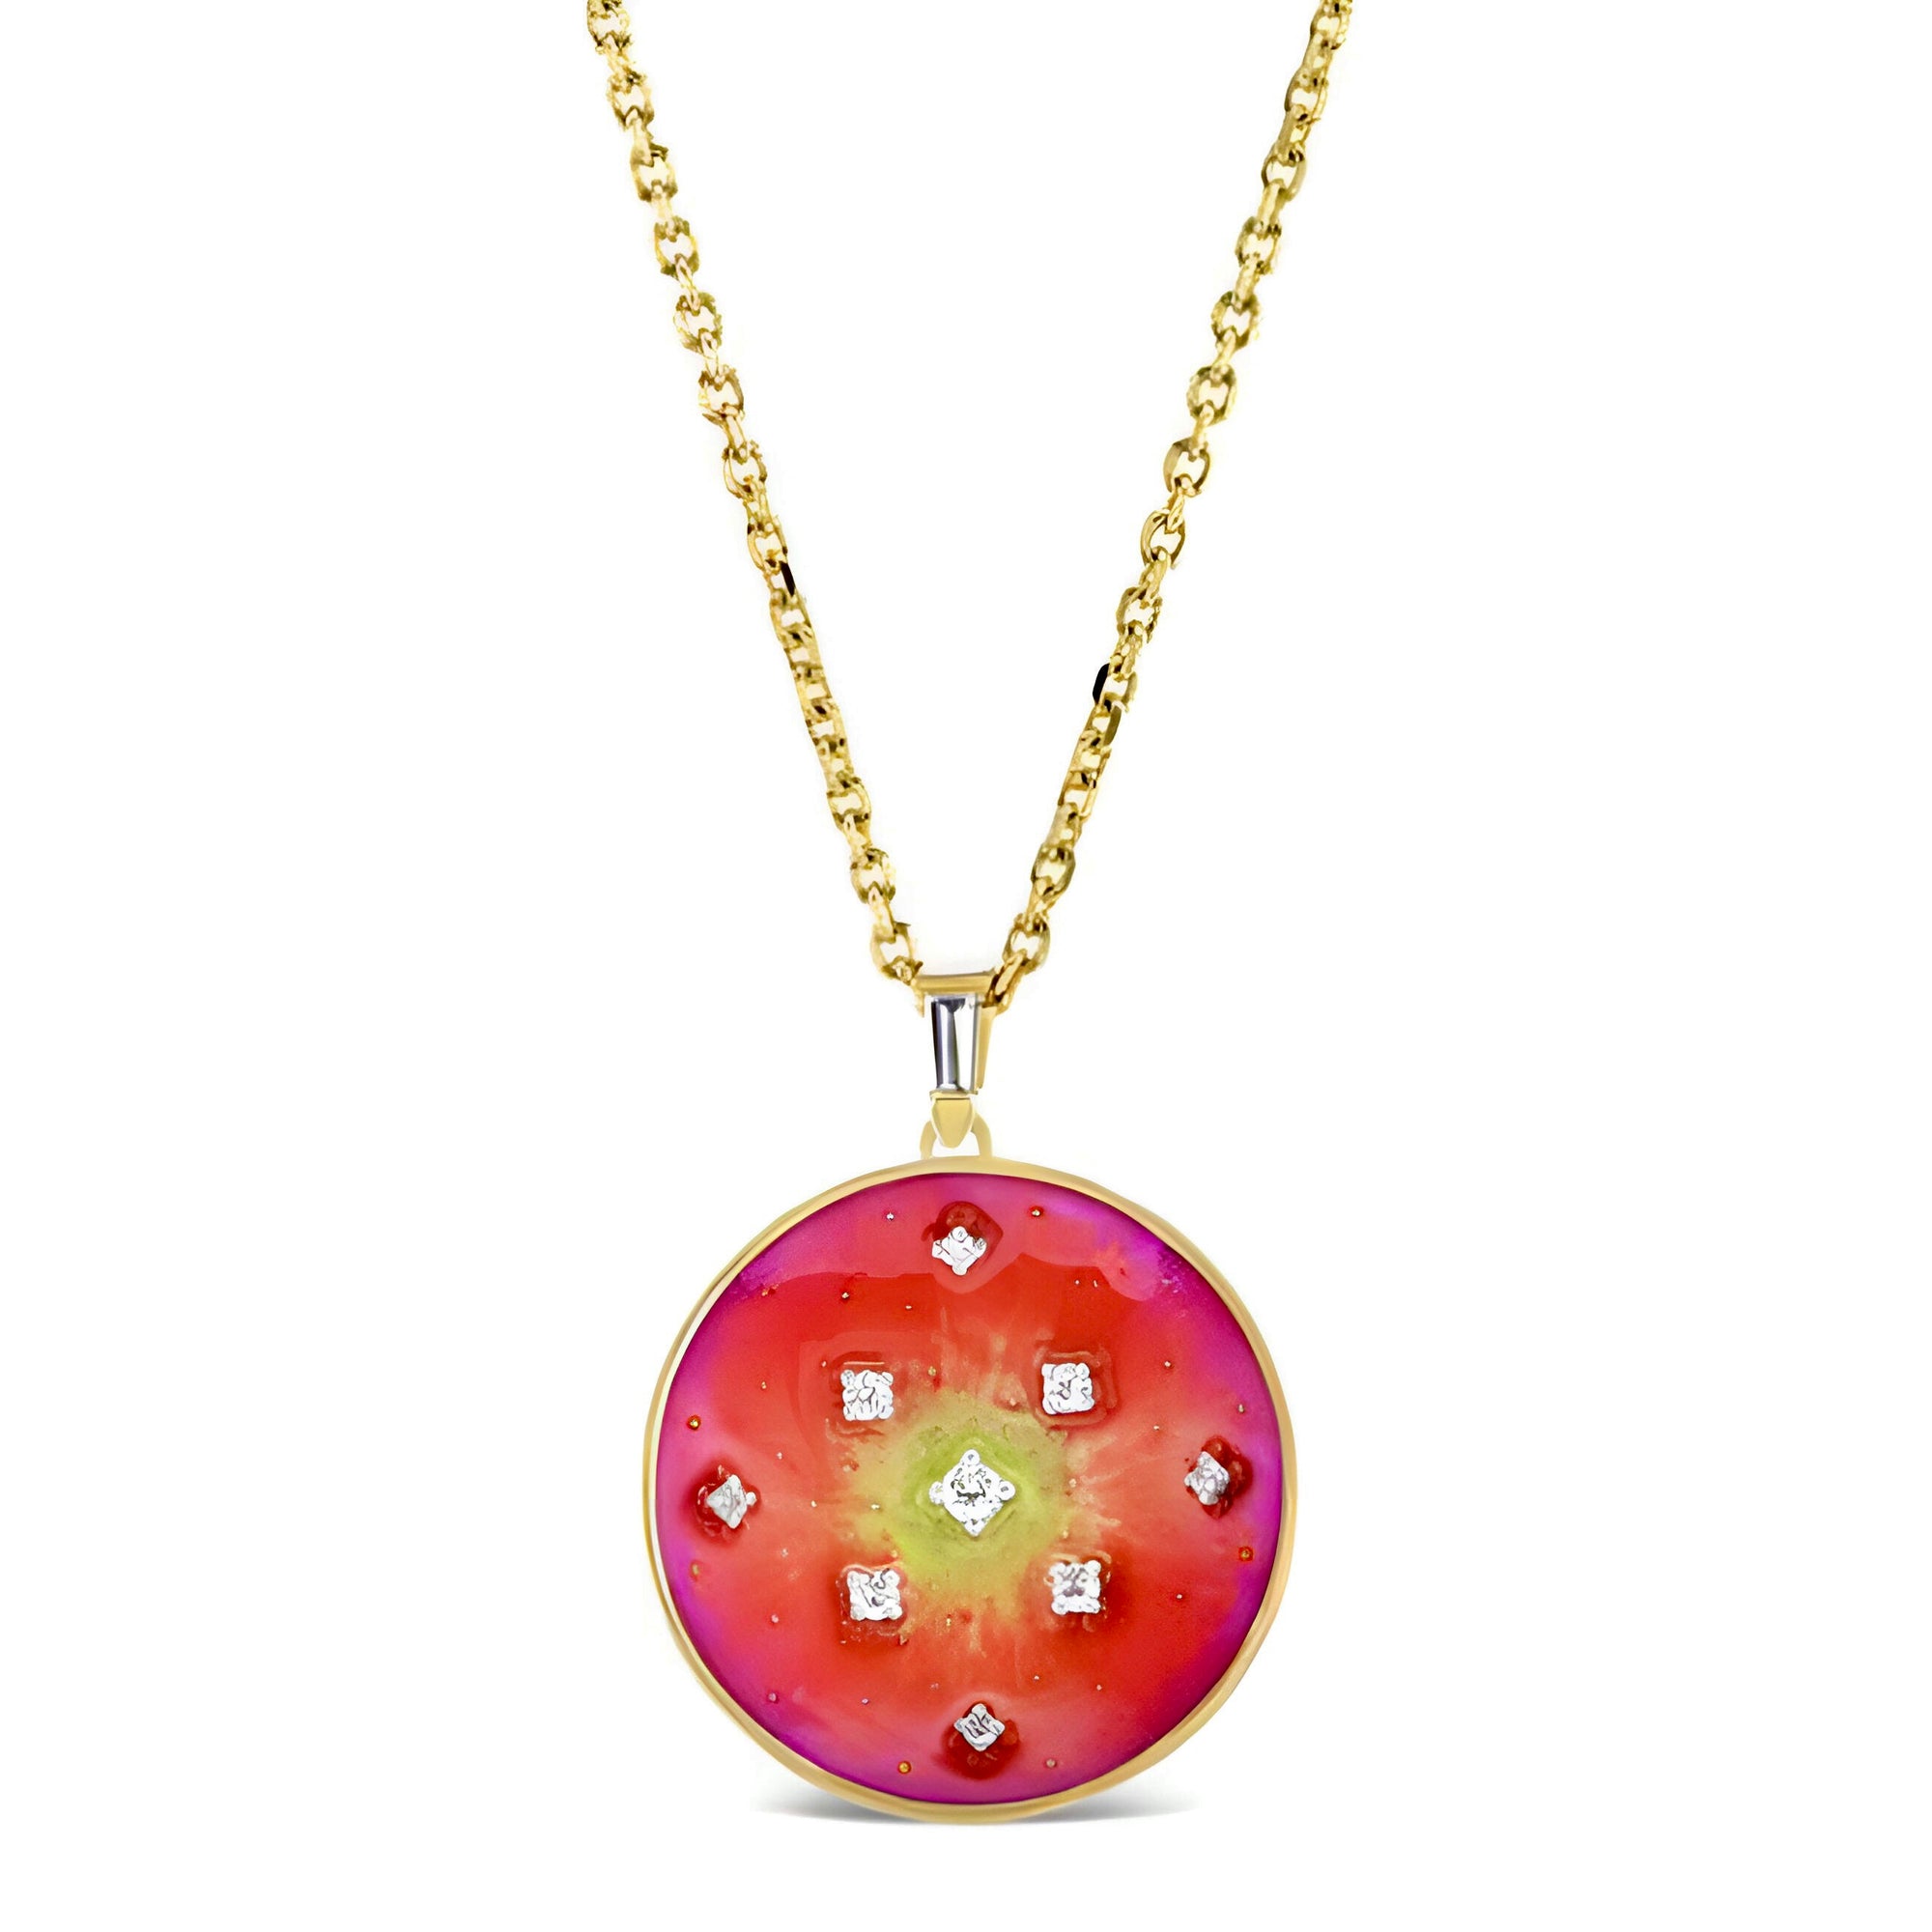 Luxe Sunset Enamel Pendant Necklace by Meredith Young available at Talisman Collection Fine Jewelers in El Dorado Hills, CA and online. This pendant's enamel work evokes the vibrant hues of a setting sun, providing a colorful backdrop for .2 cts of diamonds that twinkle like stars emerging in the evening sky. Meticulously designed, this 18k gold pendant radiates a warm and positive energy, reminiscent of a serene sunset's beauty.